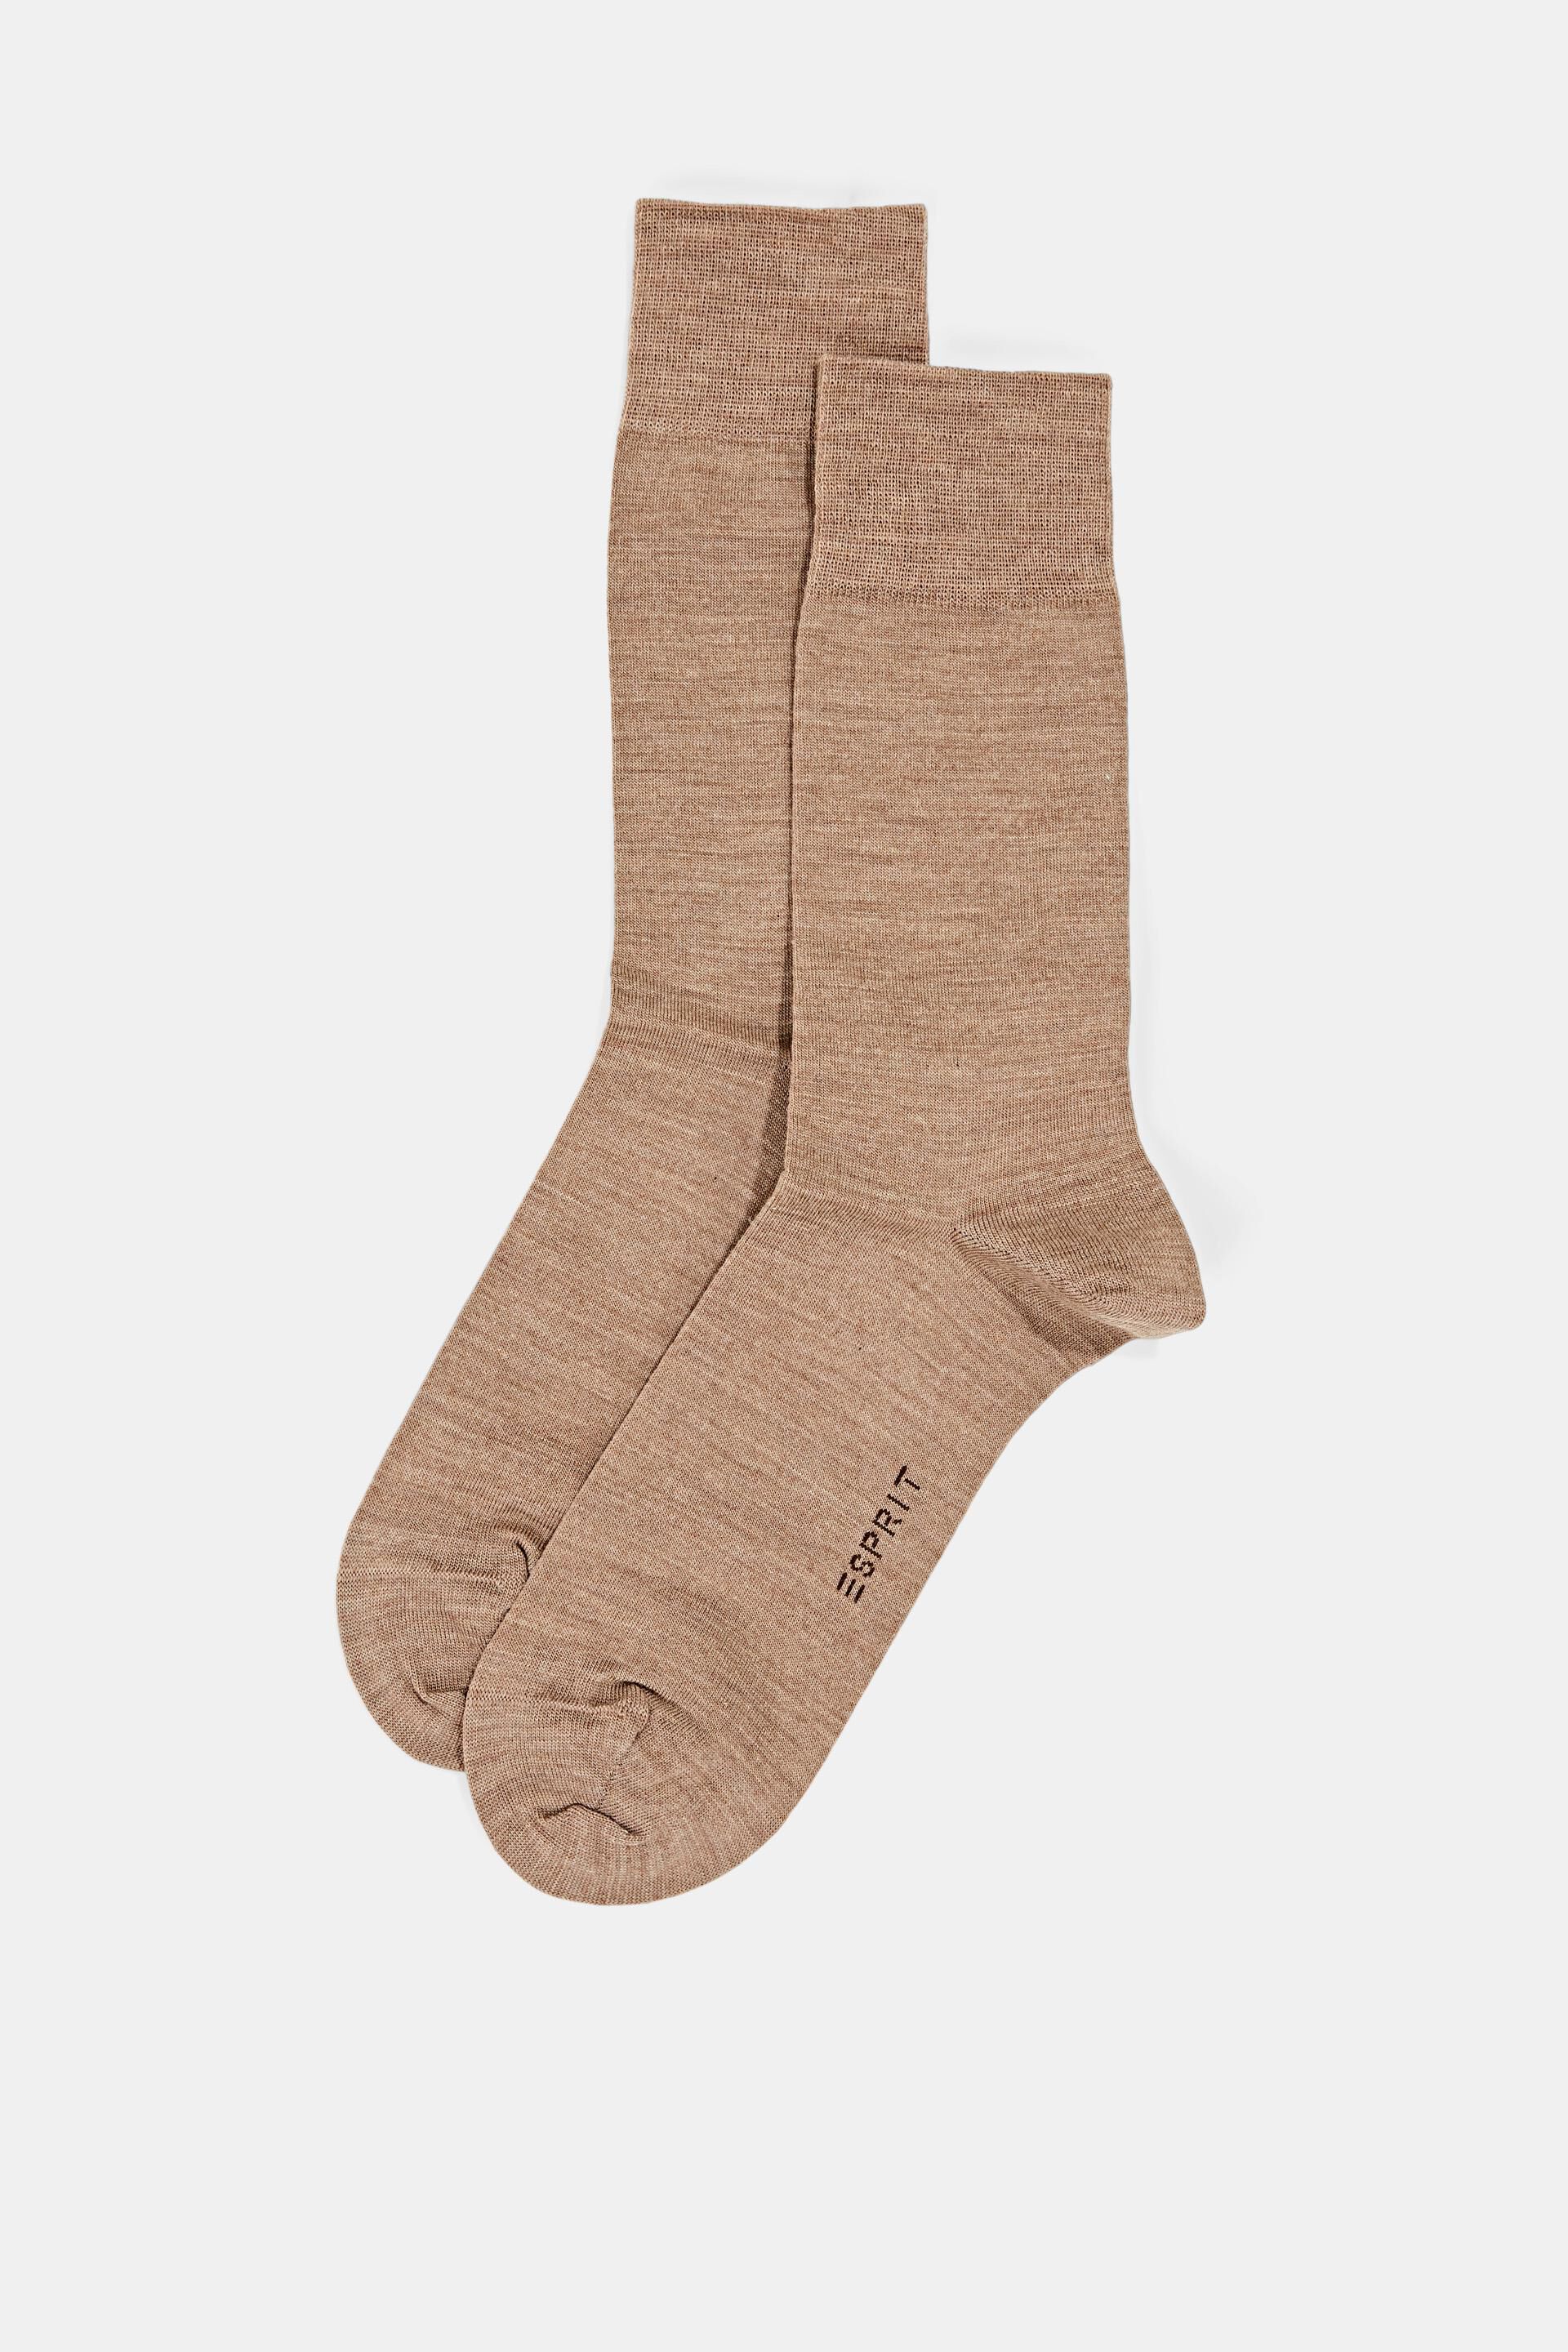 Esprit with wool knit socks of Double new pack fine